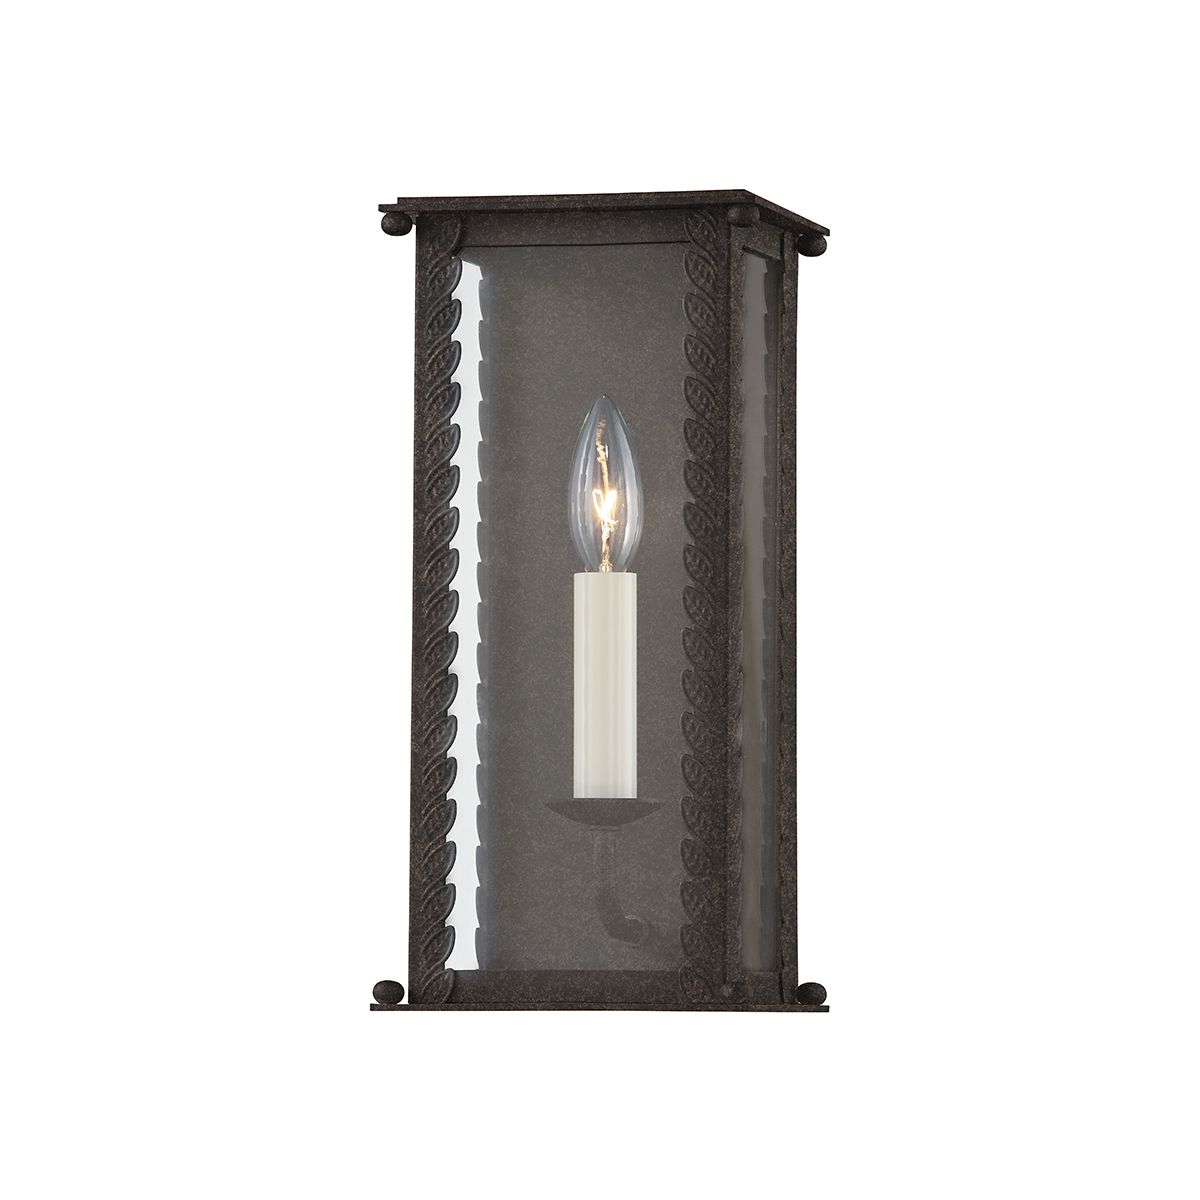 Troy ZUMA 1 LIGHT SMALL EXTERIOR WALL SCONCE B6711 Outdoor l Wall Troy Lighting FRENCH IRON  